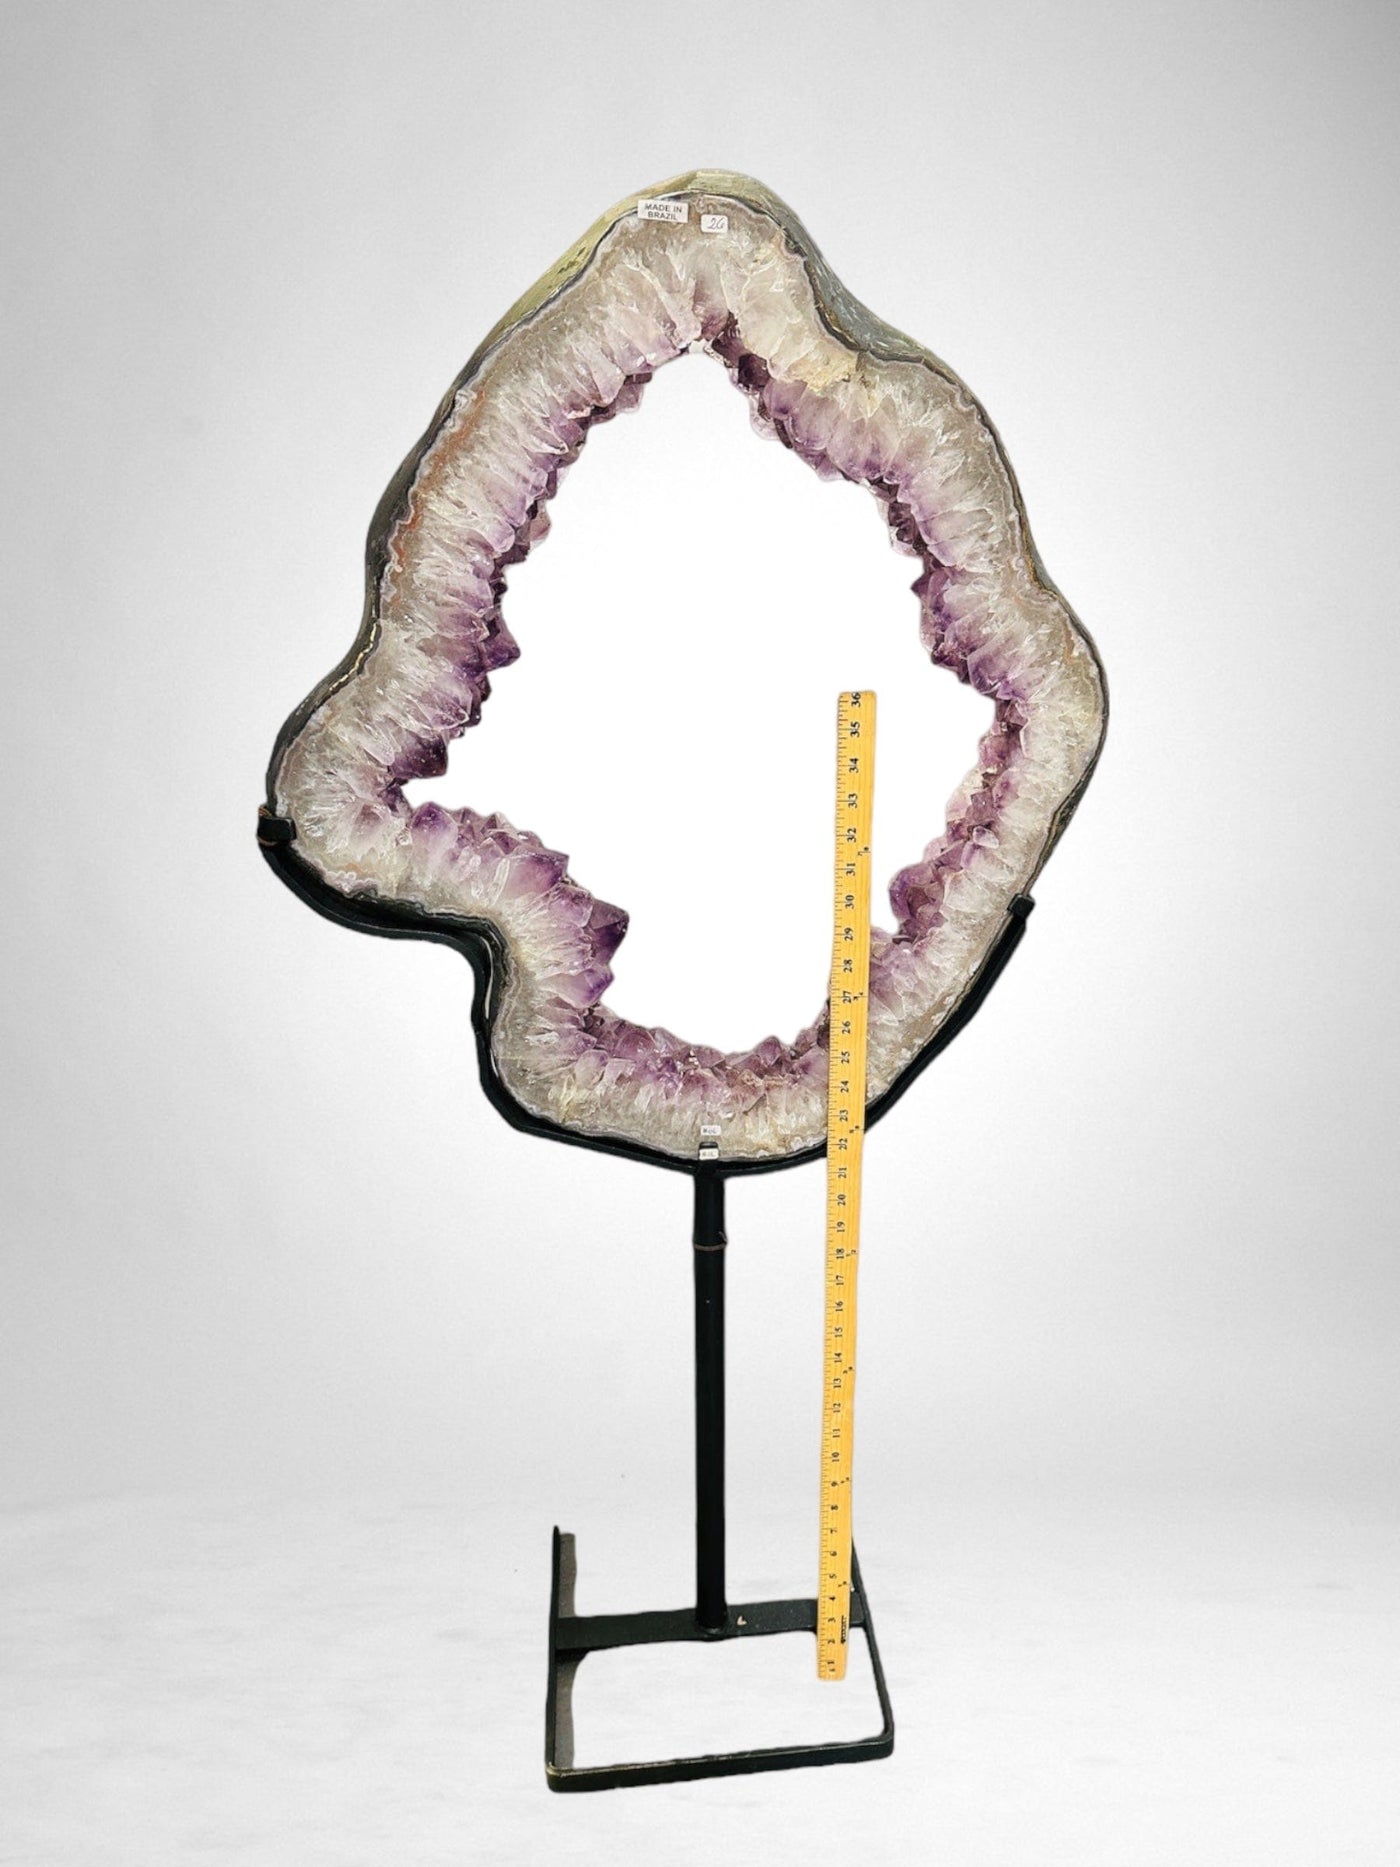 Large Amethyst Portal on Metal Stand on white background next to a yard stick for size reference